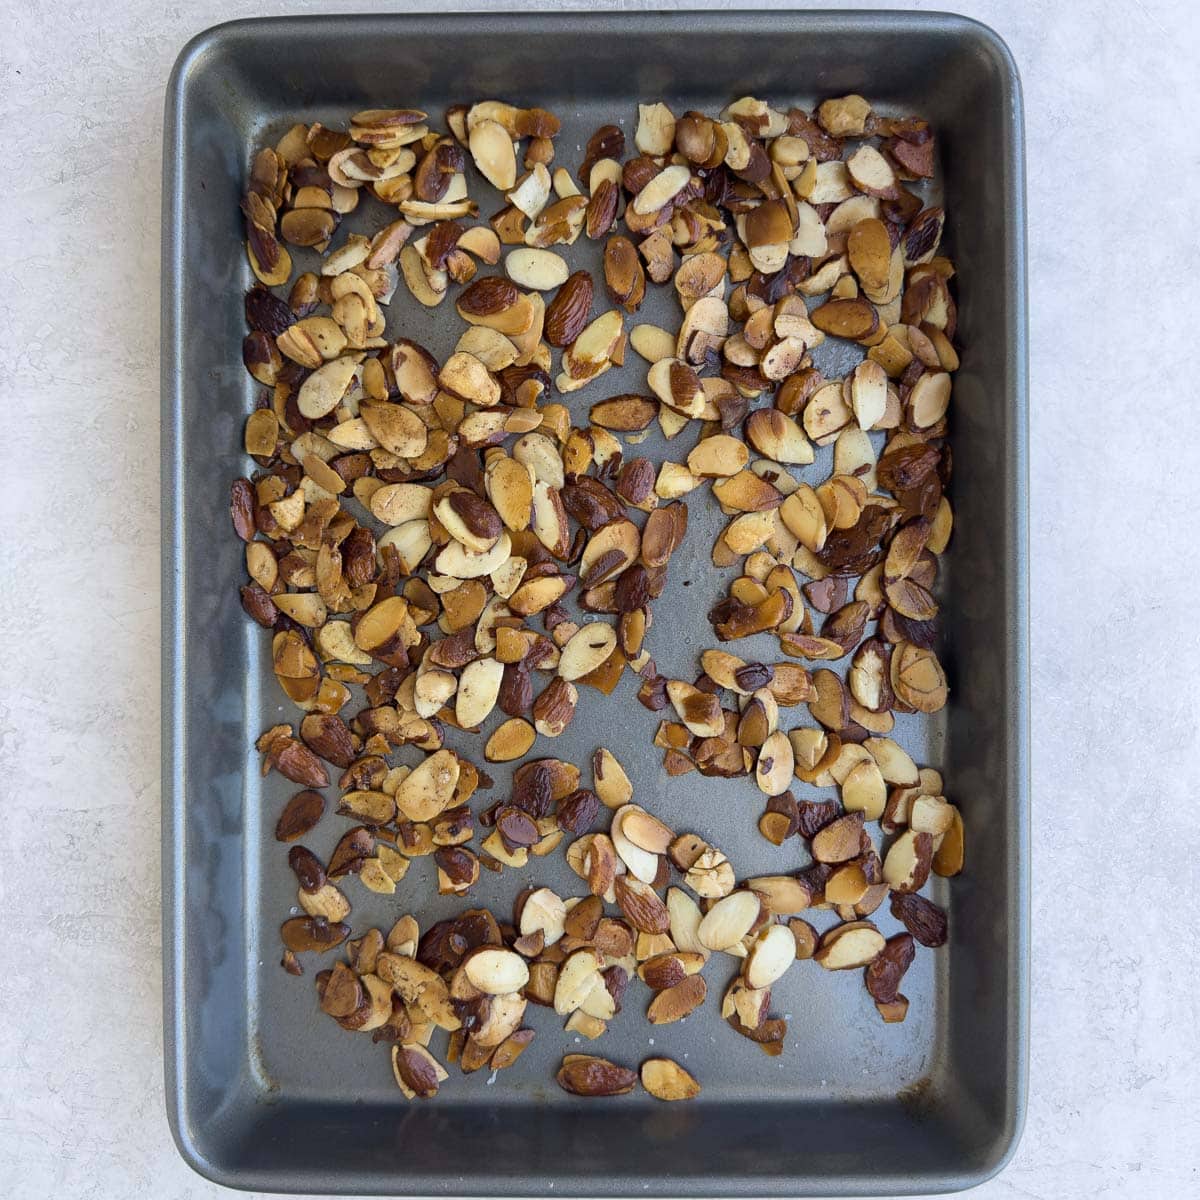 Toasted almonds cooling on a sheet pan.